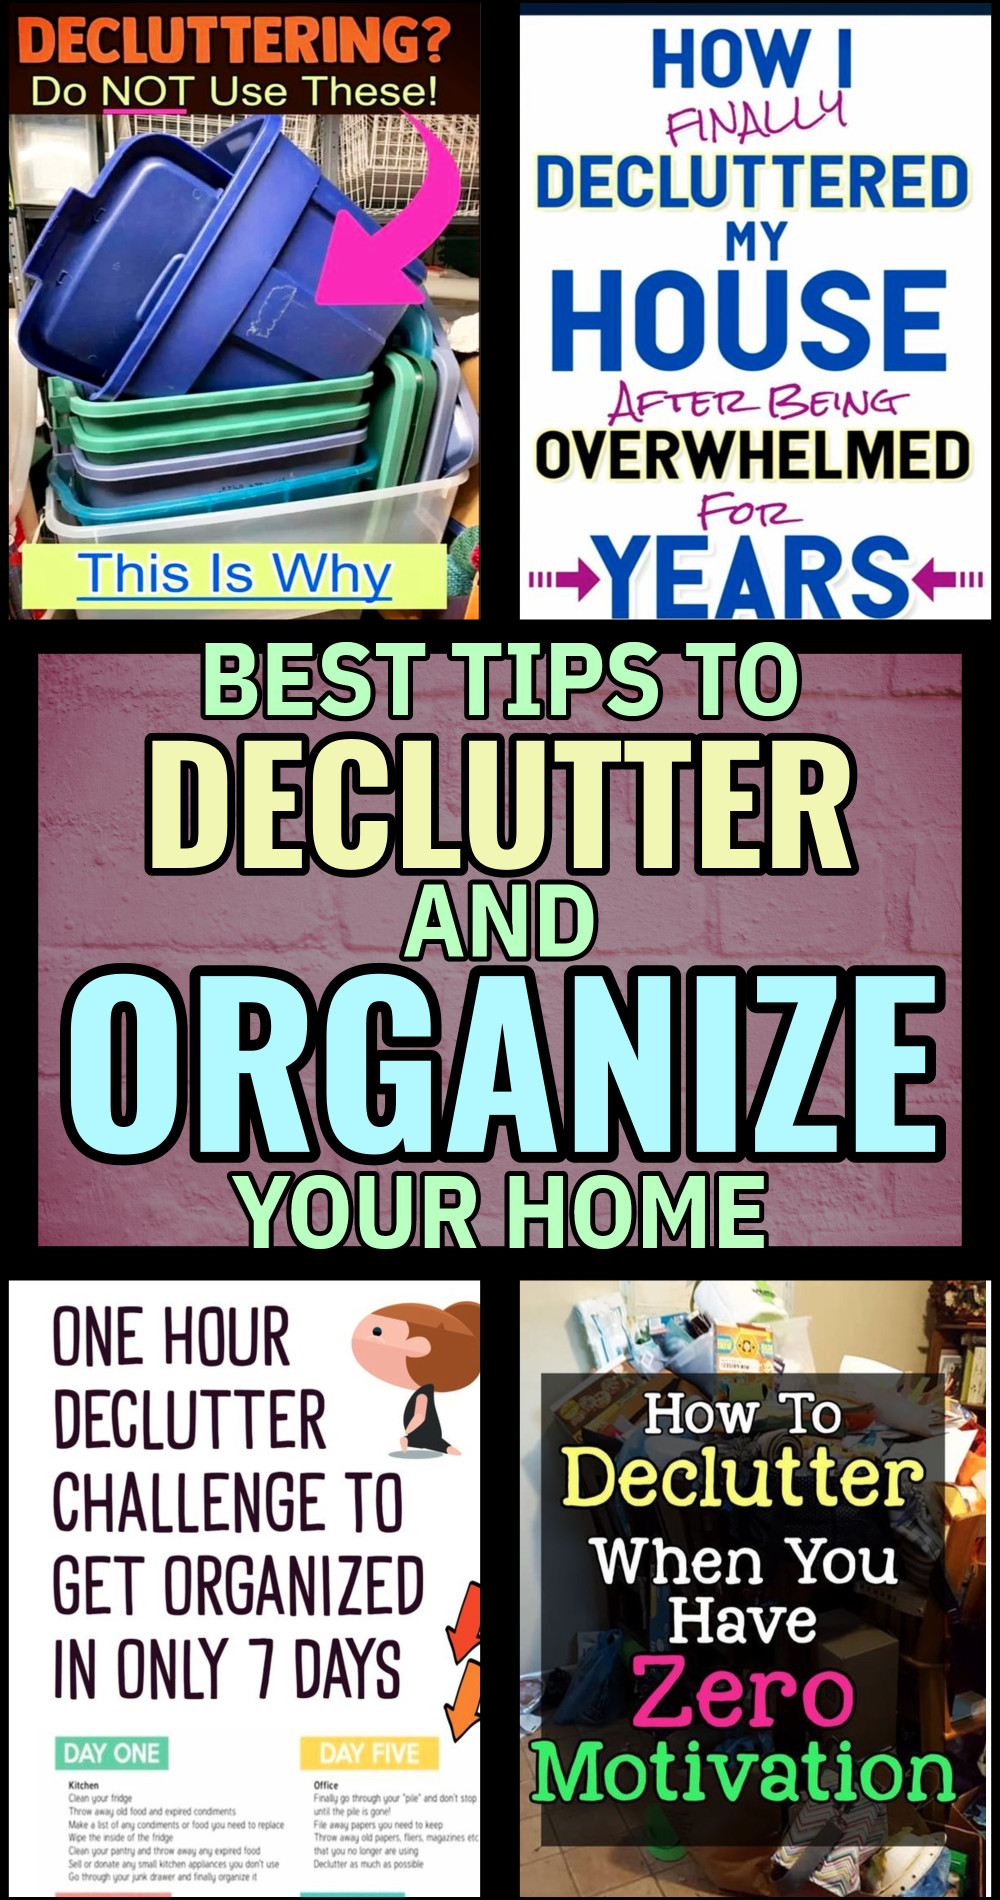 more decluttering, downsizing and organizing ideas